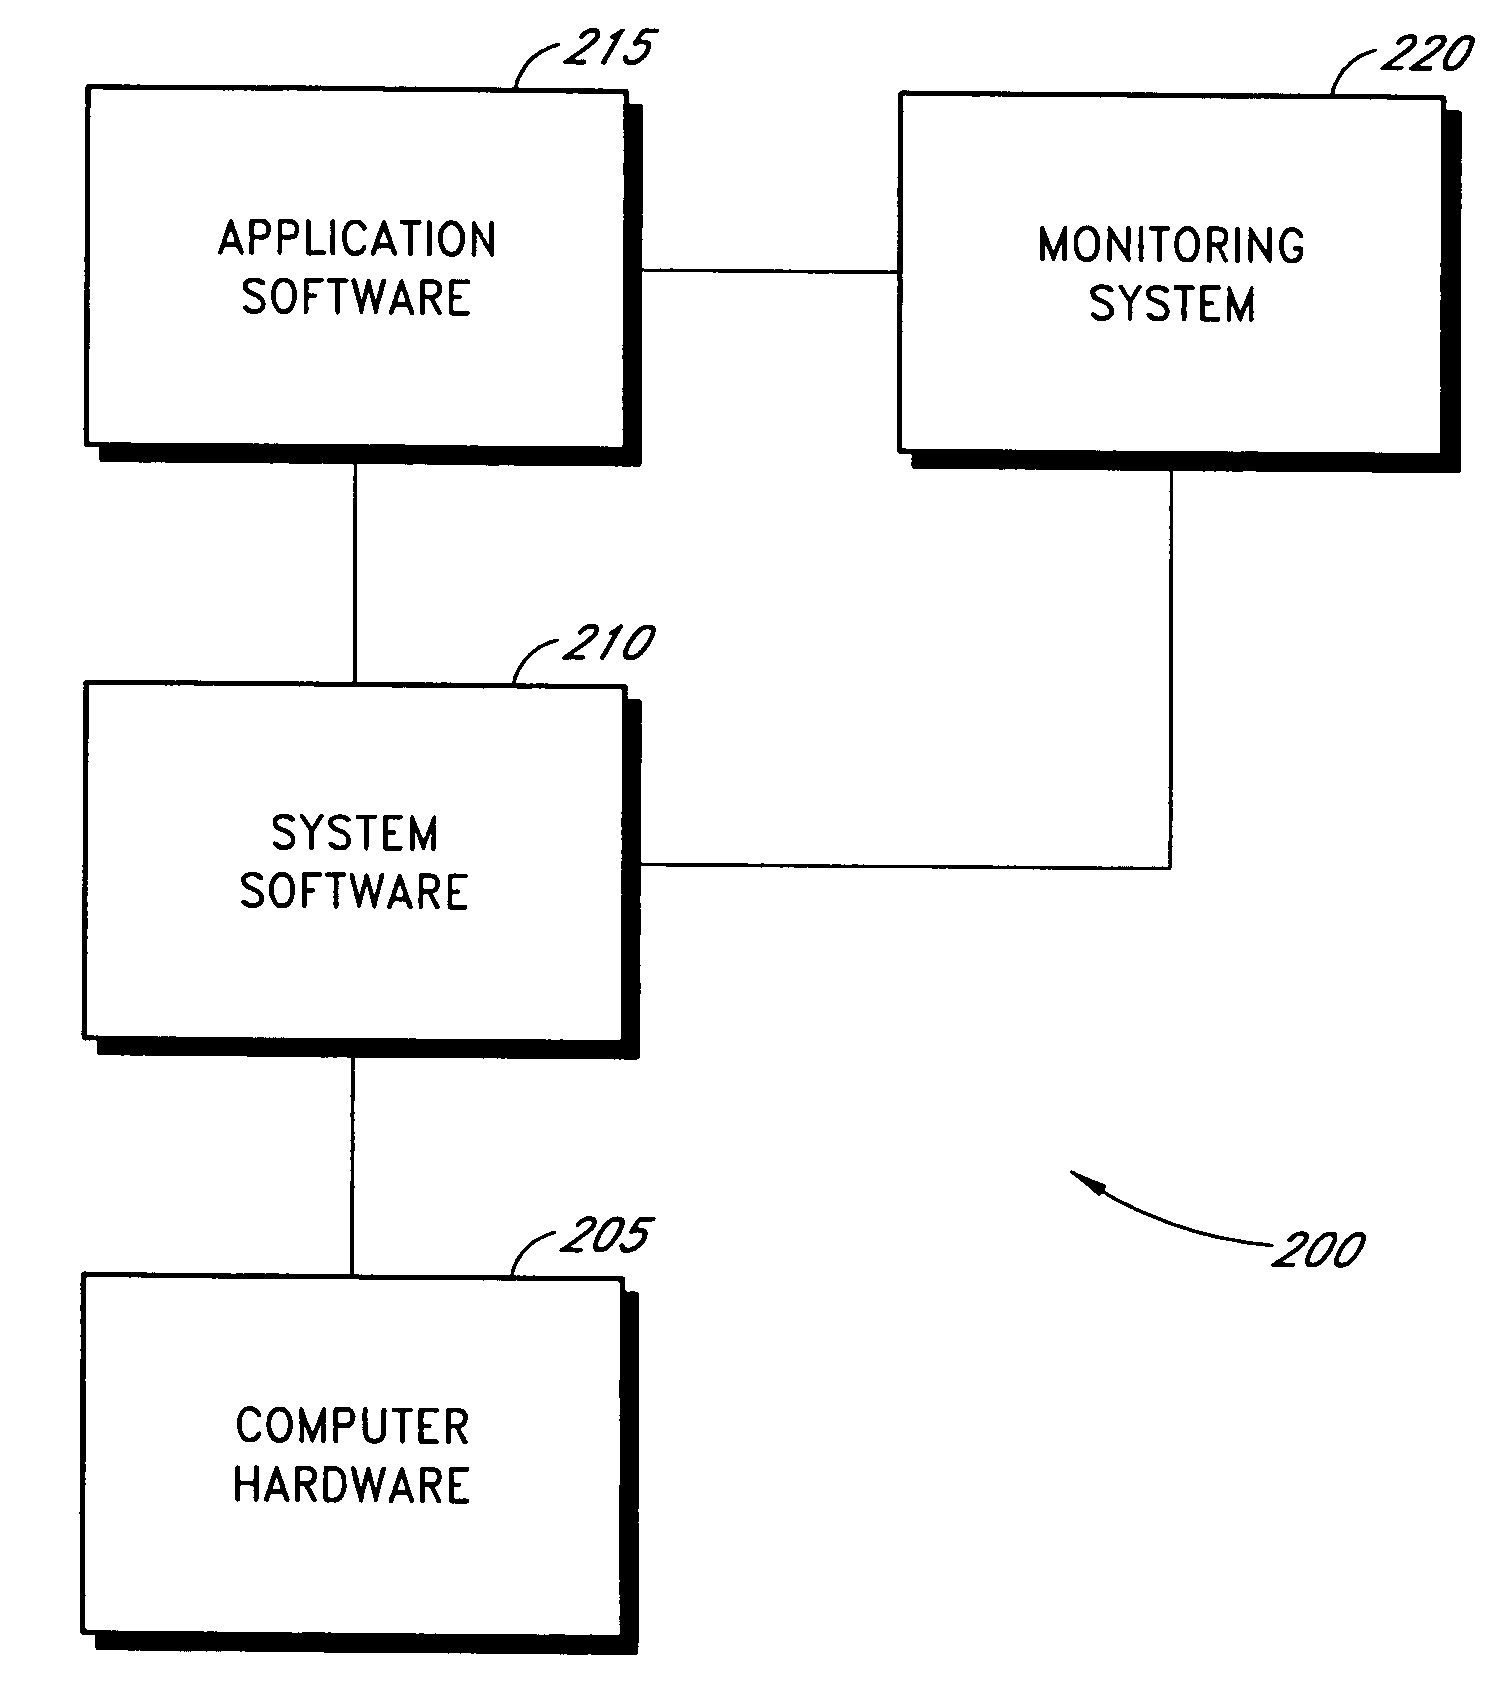 Systems and methods for monitoring a computing environment